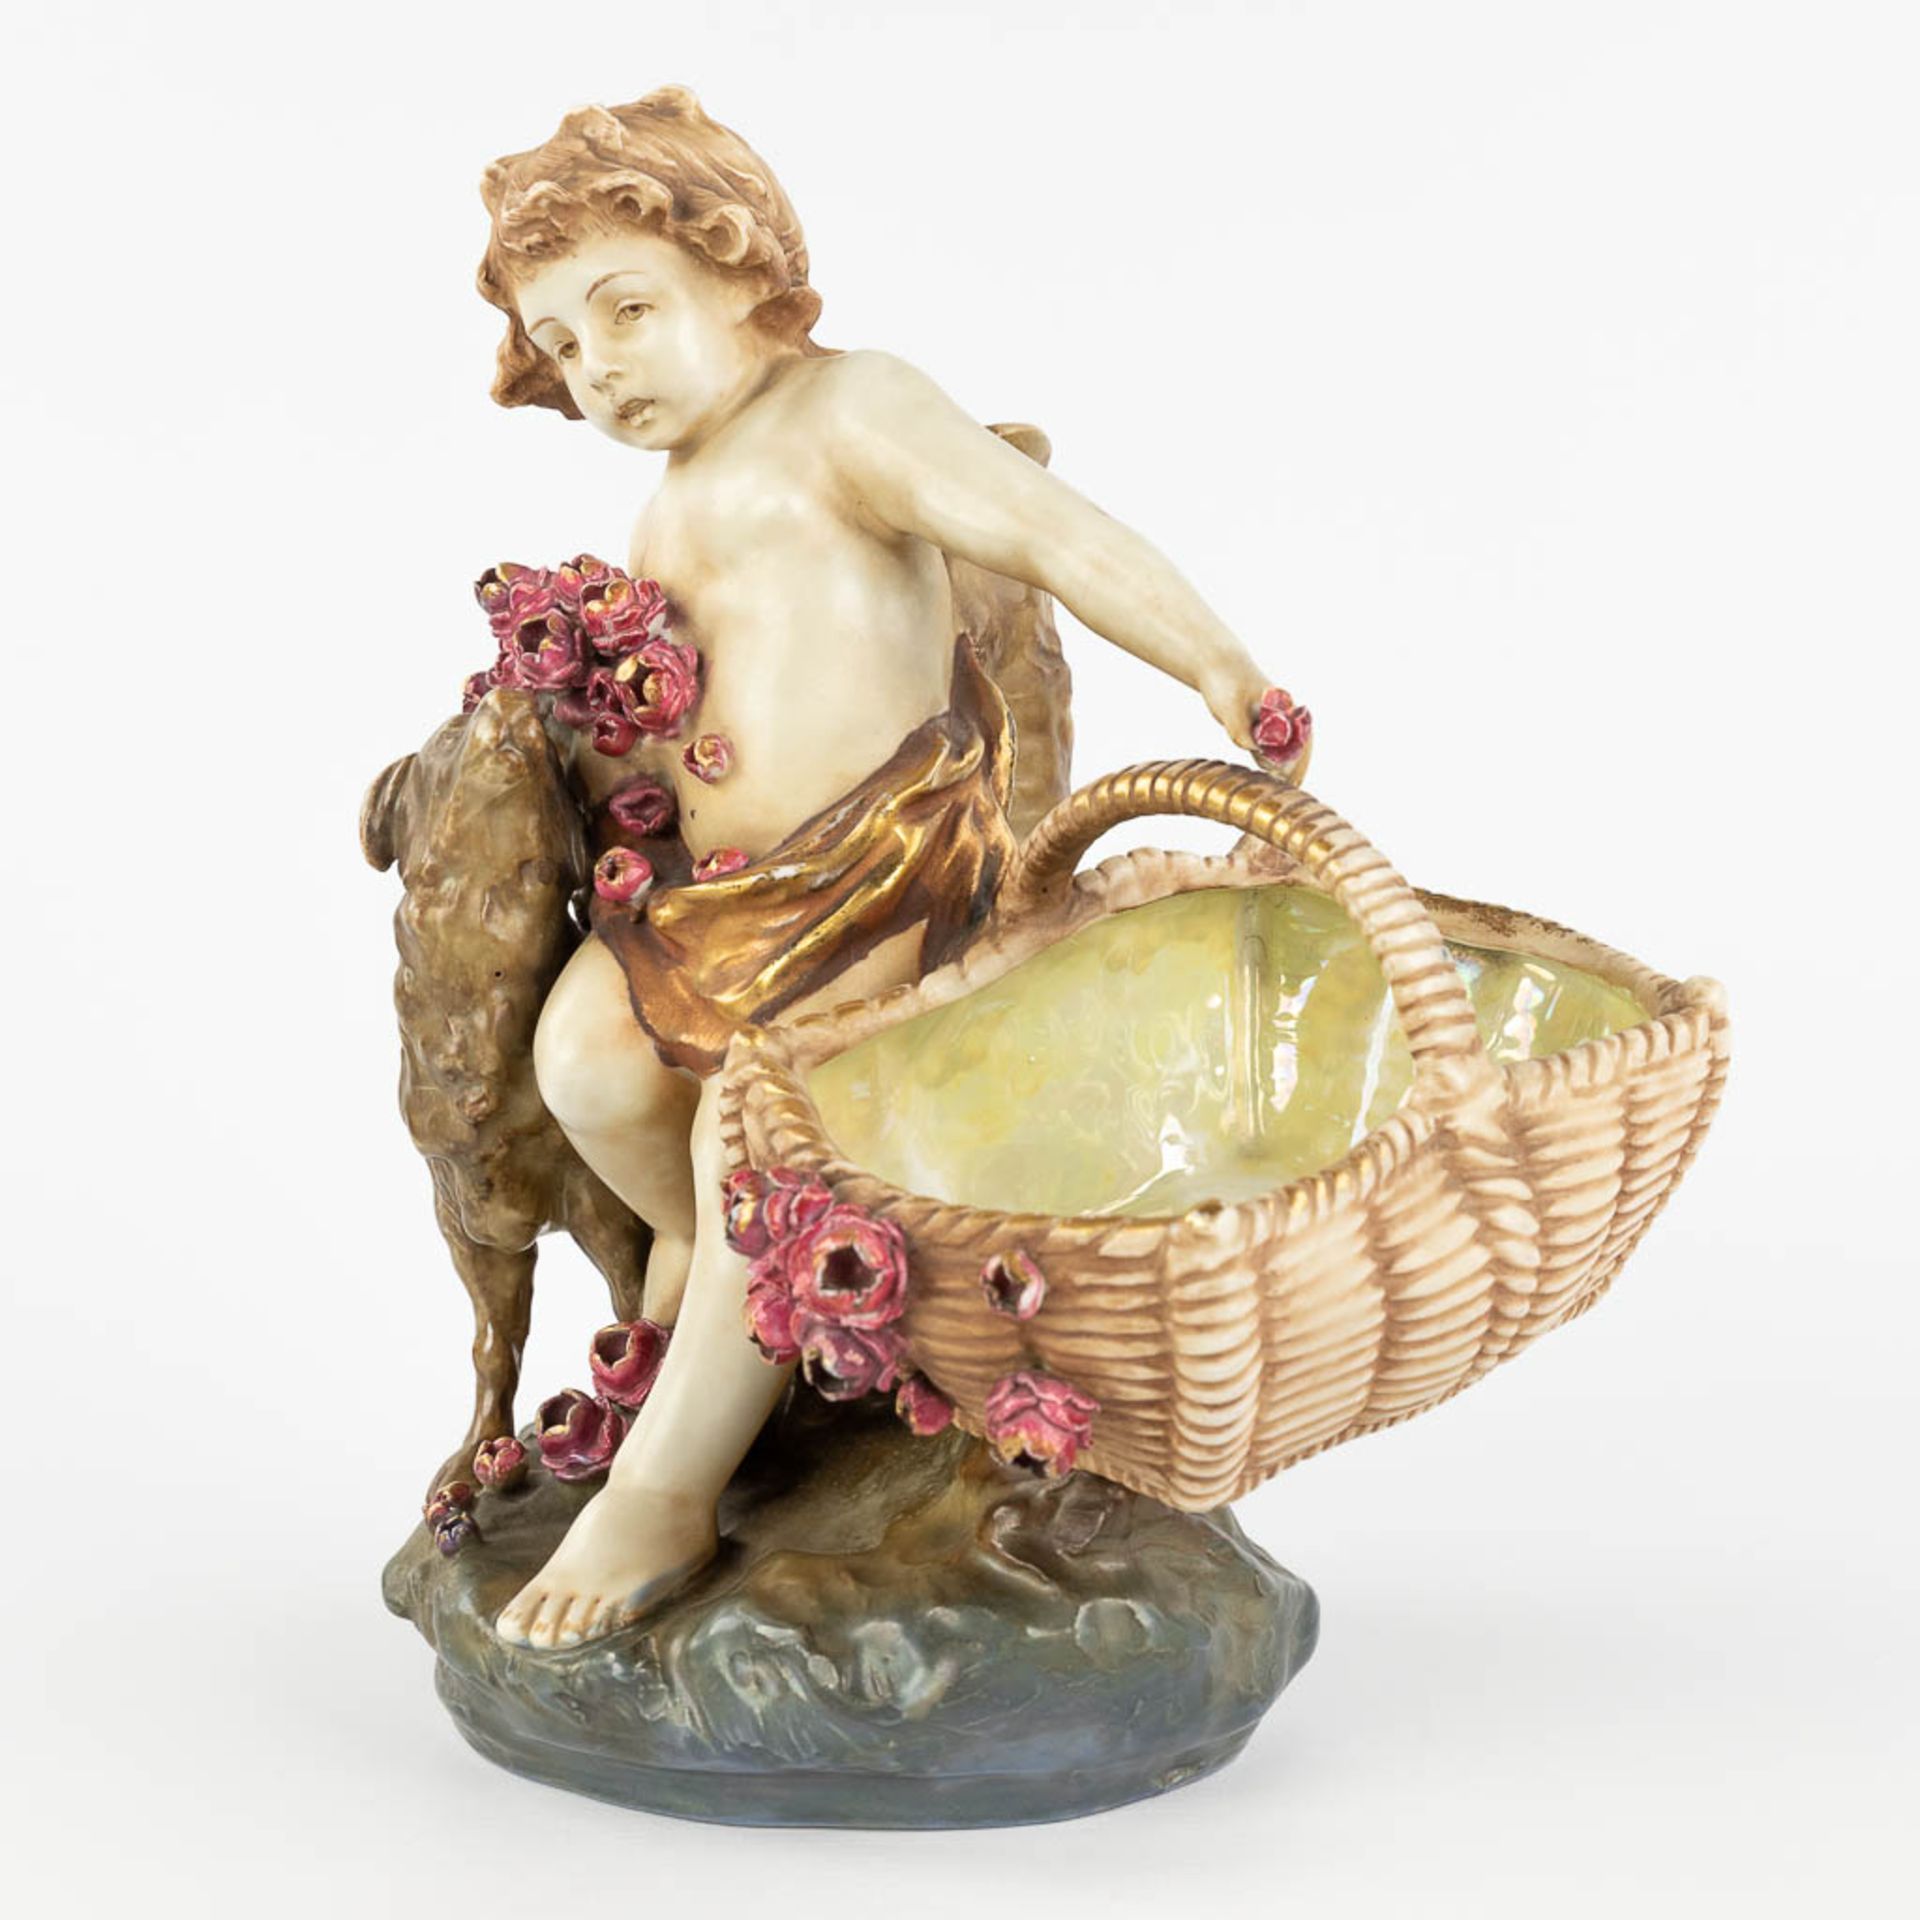 Amphora Austria, 'Child with a basket and sheep' made of glazed faience. (L: 18 x W: 24 x H: 29,5 cm - Image 8 of 14